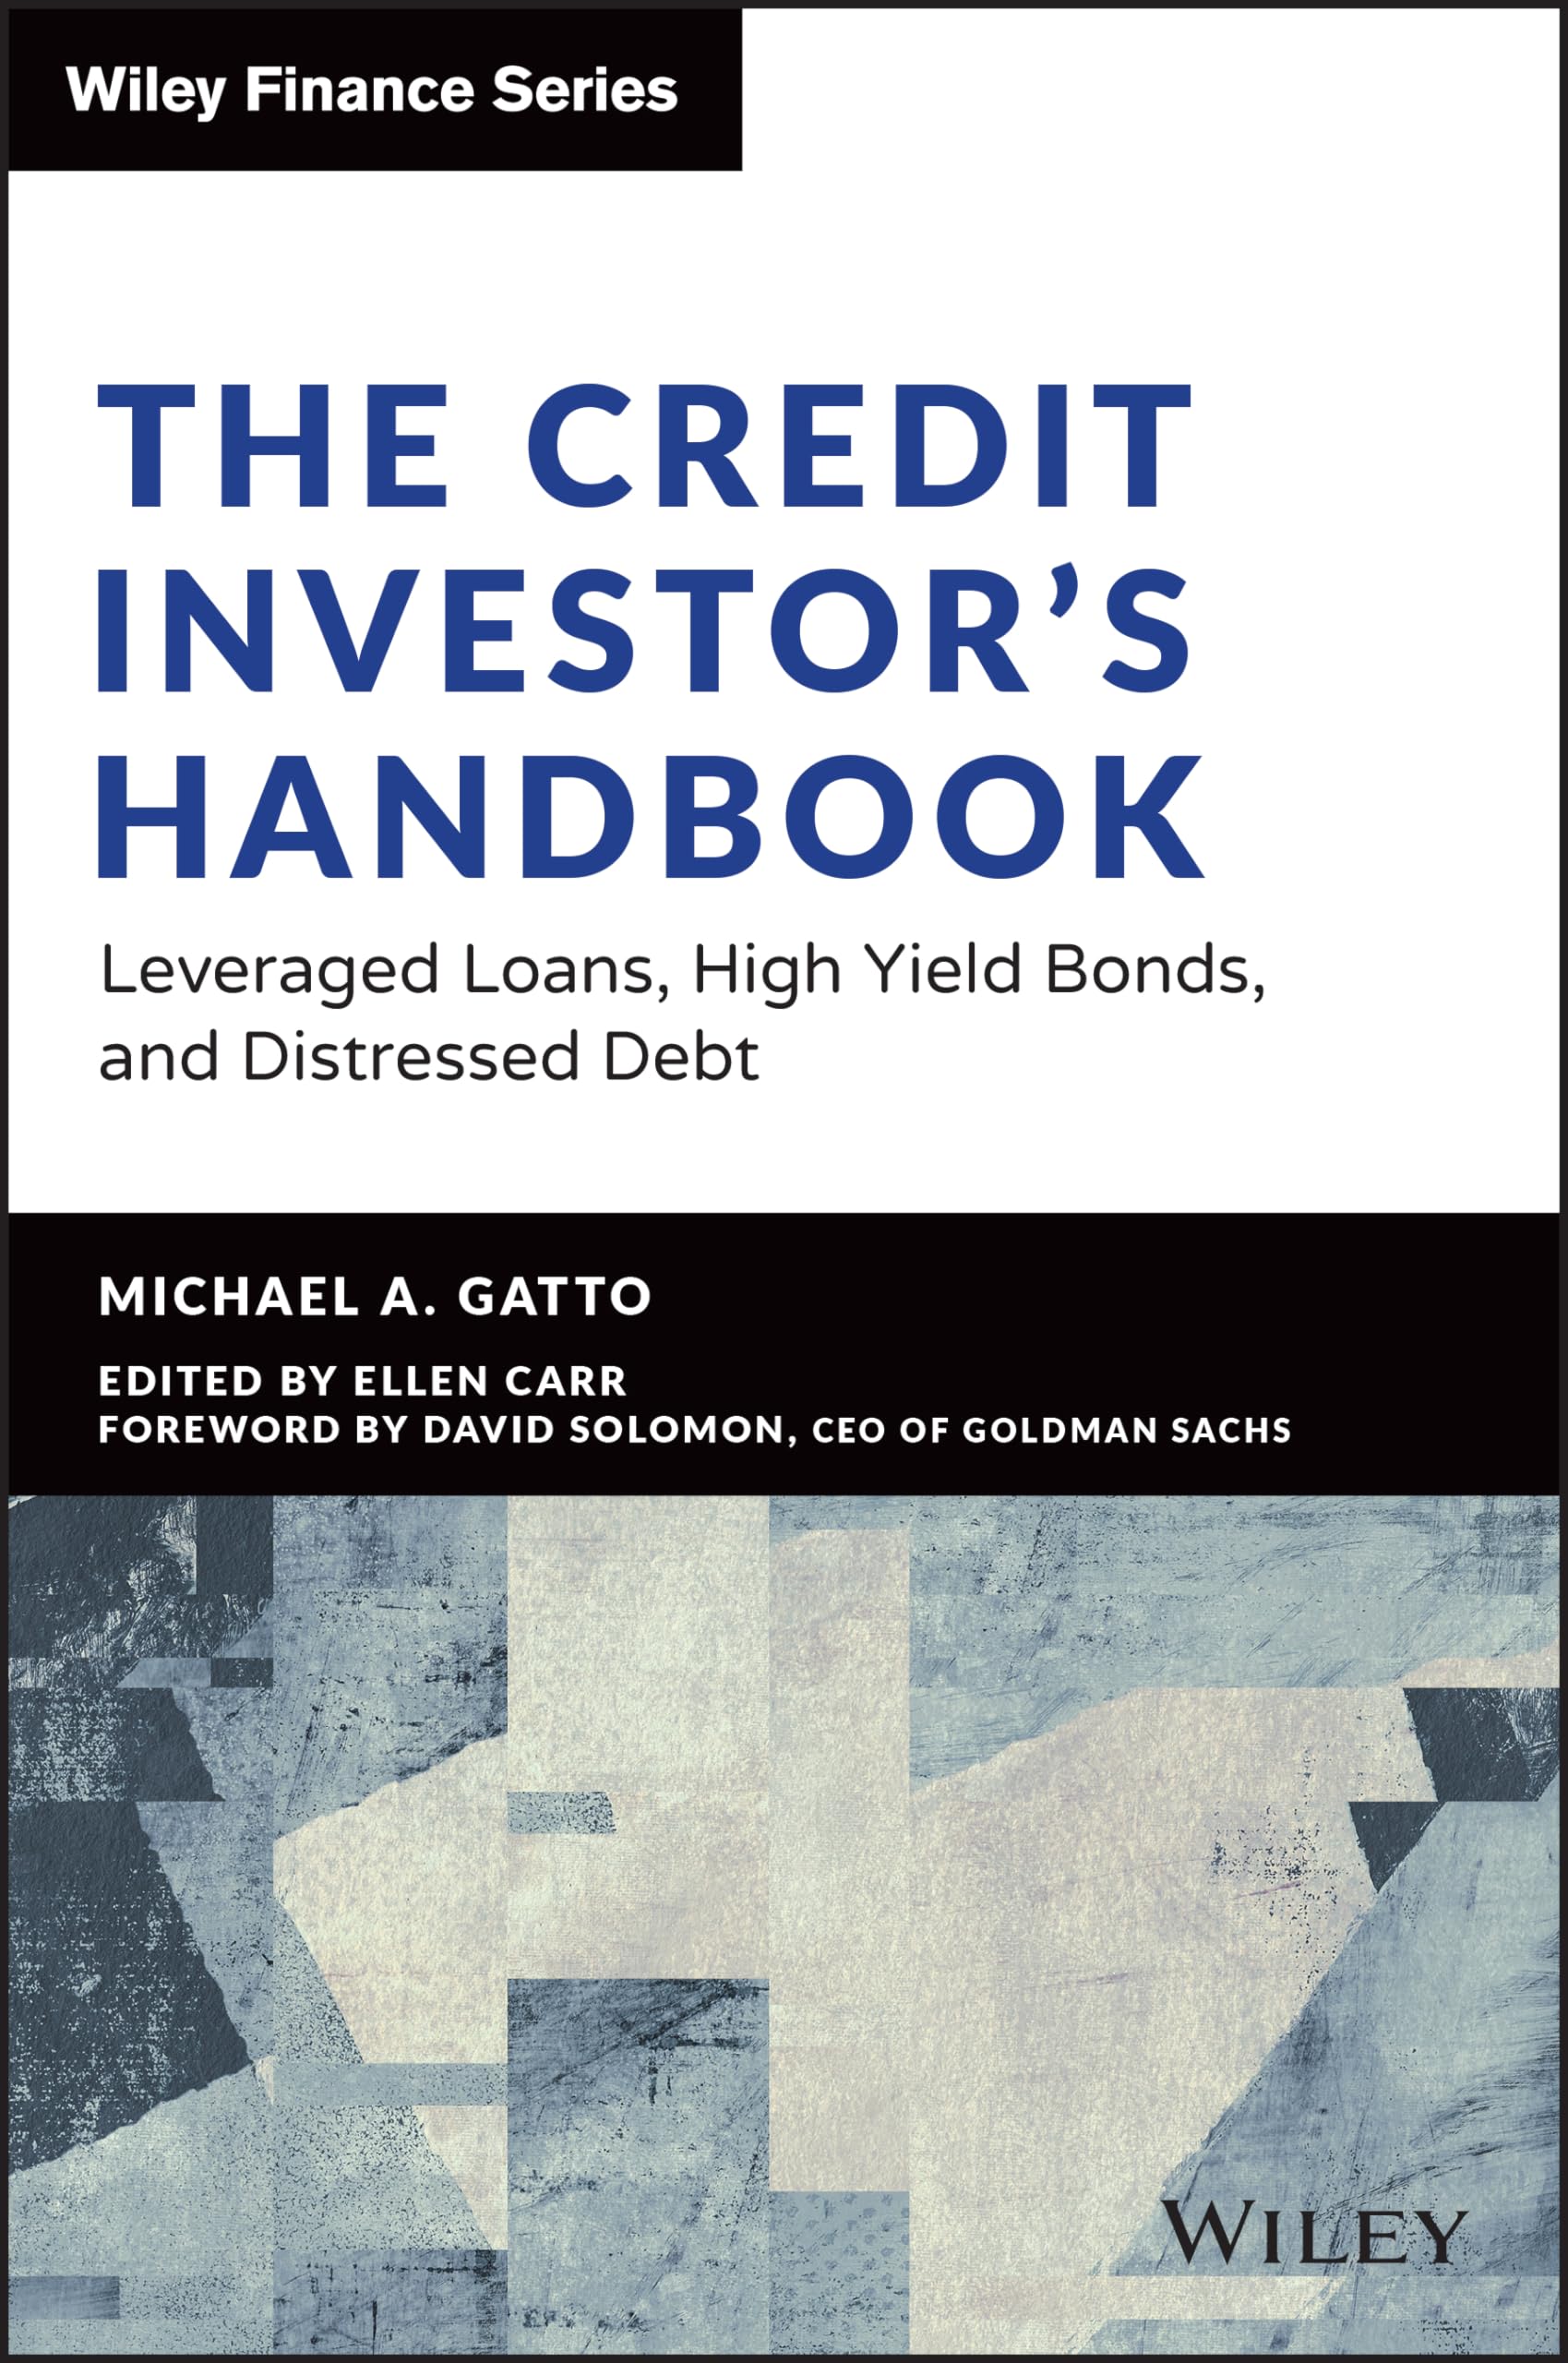 The Credit Investor’s Handbook: Leveraged Loans, High Yield Bonds, and Distressed Debt (Wiley Finance)